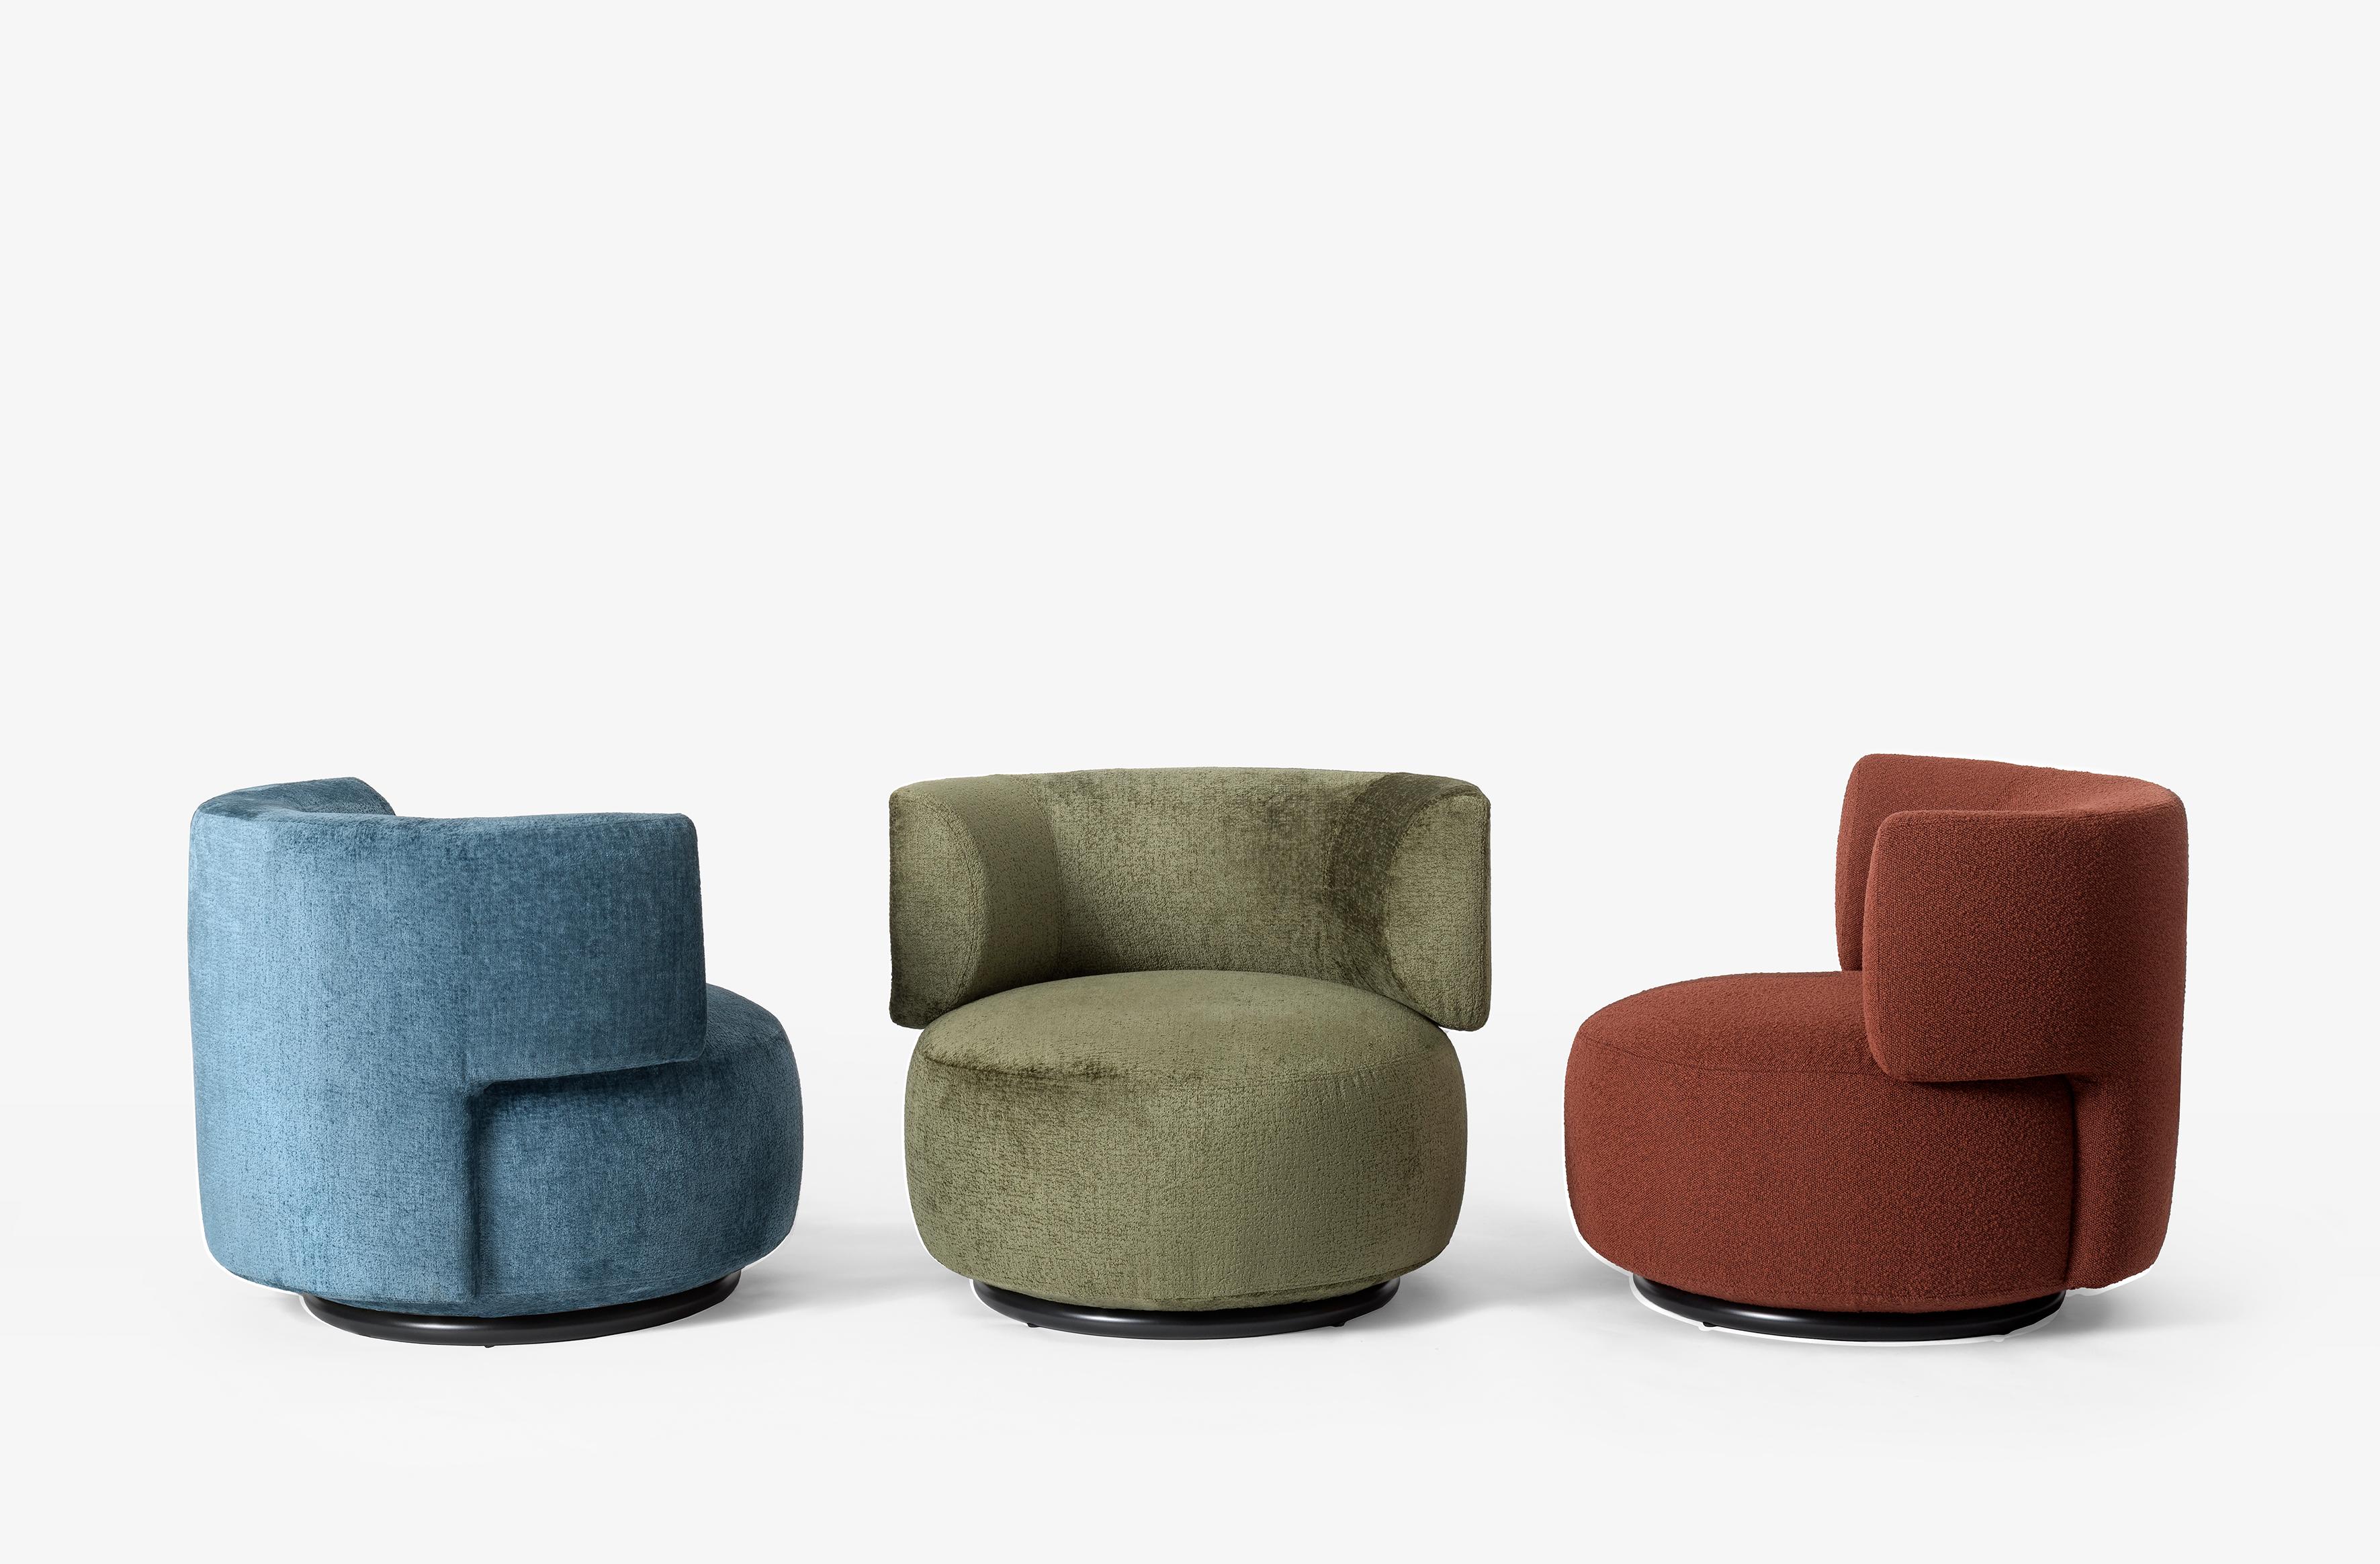 The comfort of an embrace: the K-wait upholstered collection by Rodolfo Dordoni plays with the contrast between the formal simplicity of rigorous volumes and soft, rounded lines. The division between habitat and contract solutions is increasingly